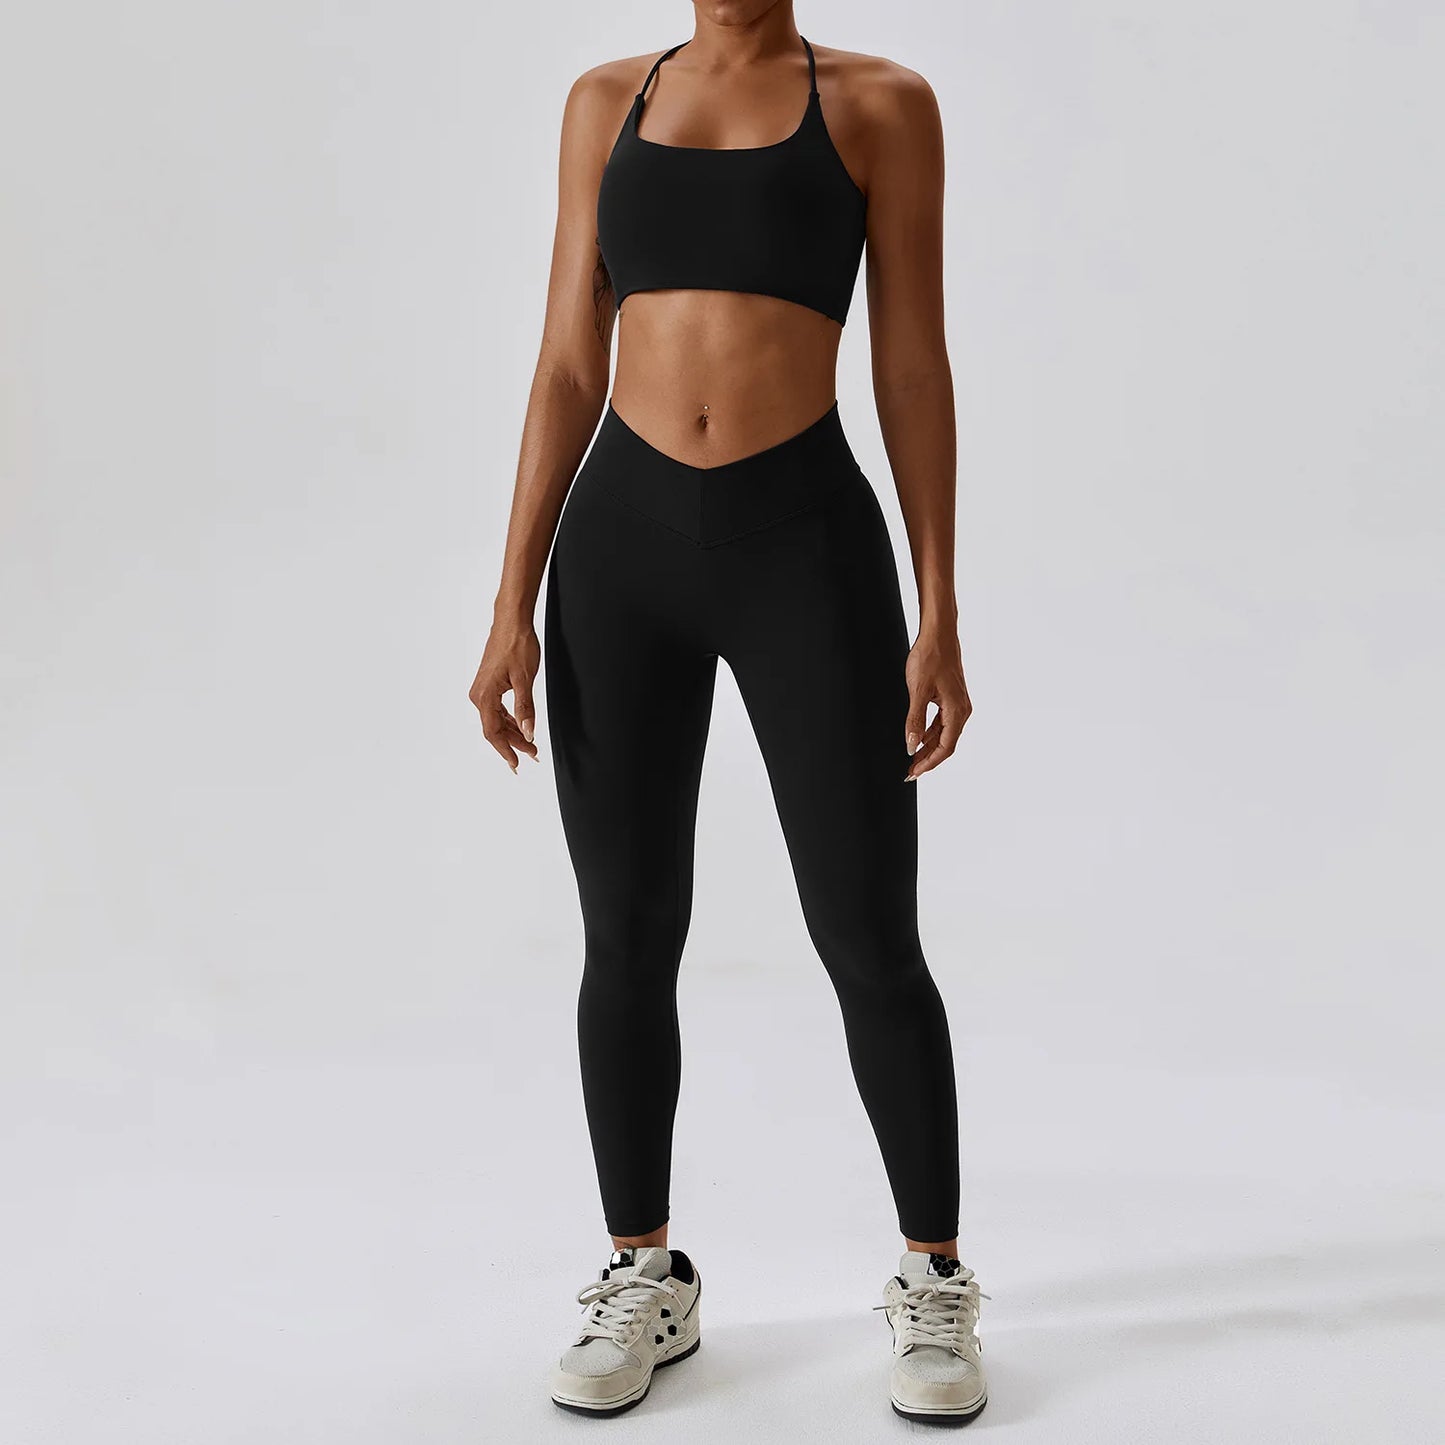 Upgrade Your Workout with Our Sexy Seamless Yoga Set - High Waist Leggings & Sports Bra Combo for Women